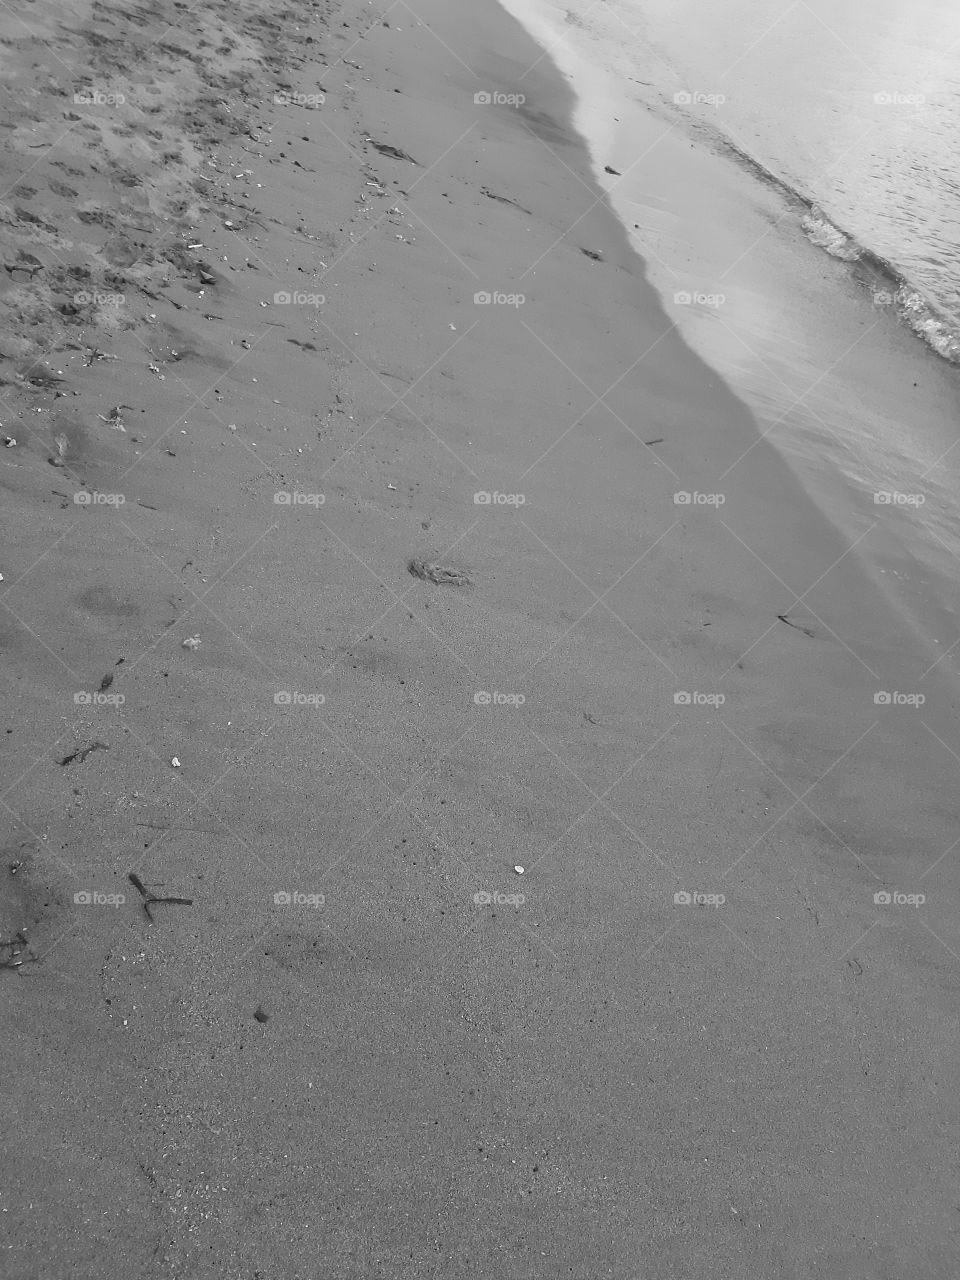 monochrome style of abstract object taken on the beach